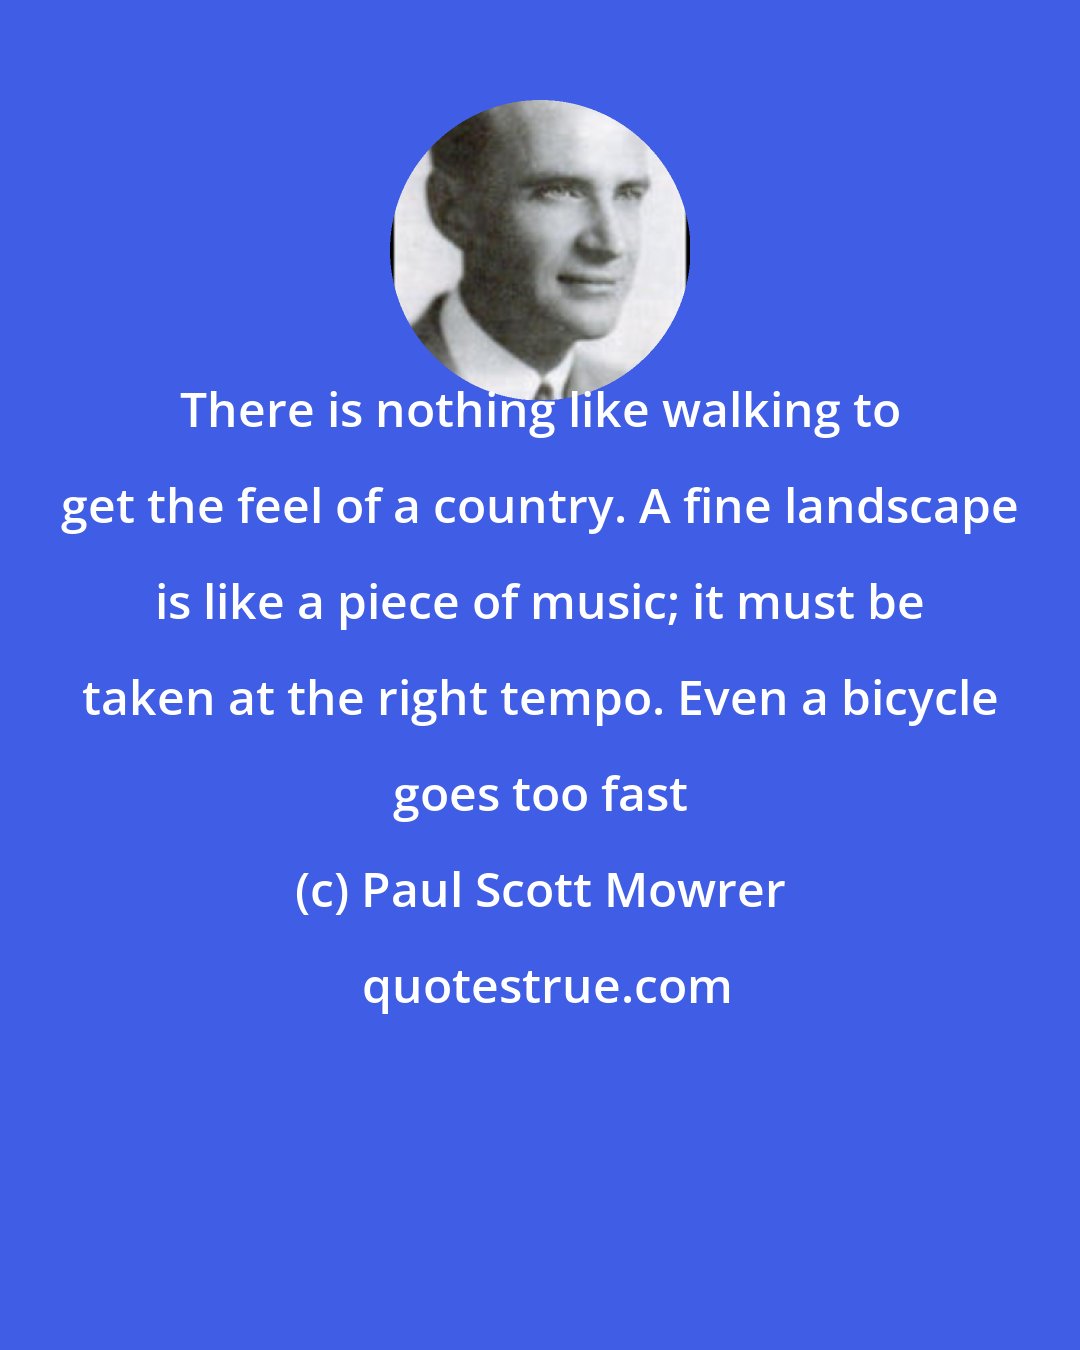 Paul Scott Mowrer: There is nothing like walking to get the feel of a country. A fine landscape is like a piece of music; it must be taken at the right tempo. Even a bicycle goes too fast